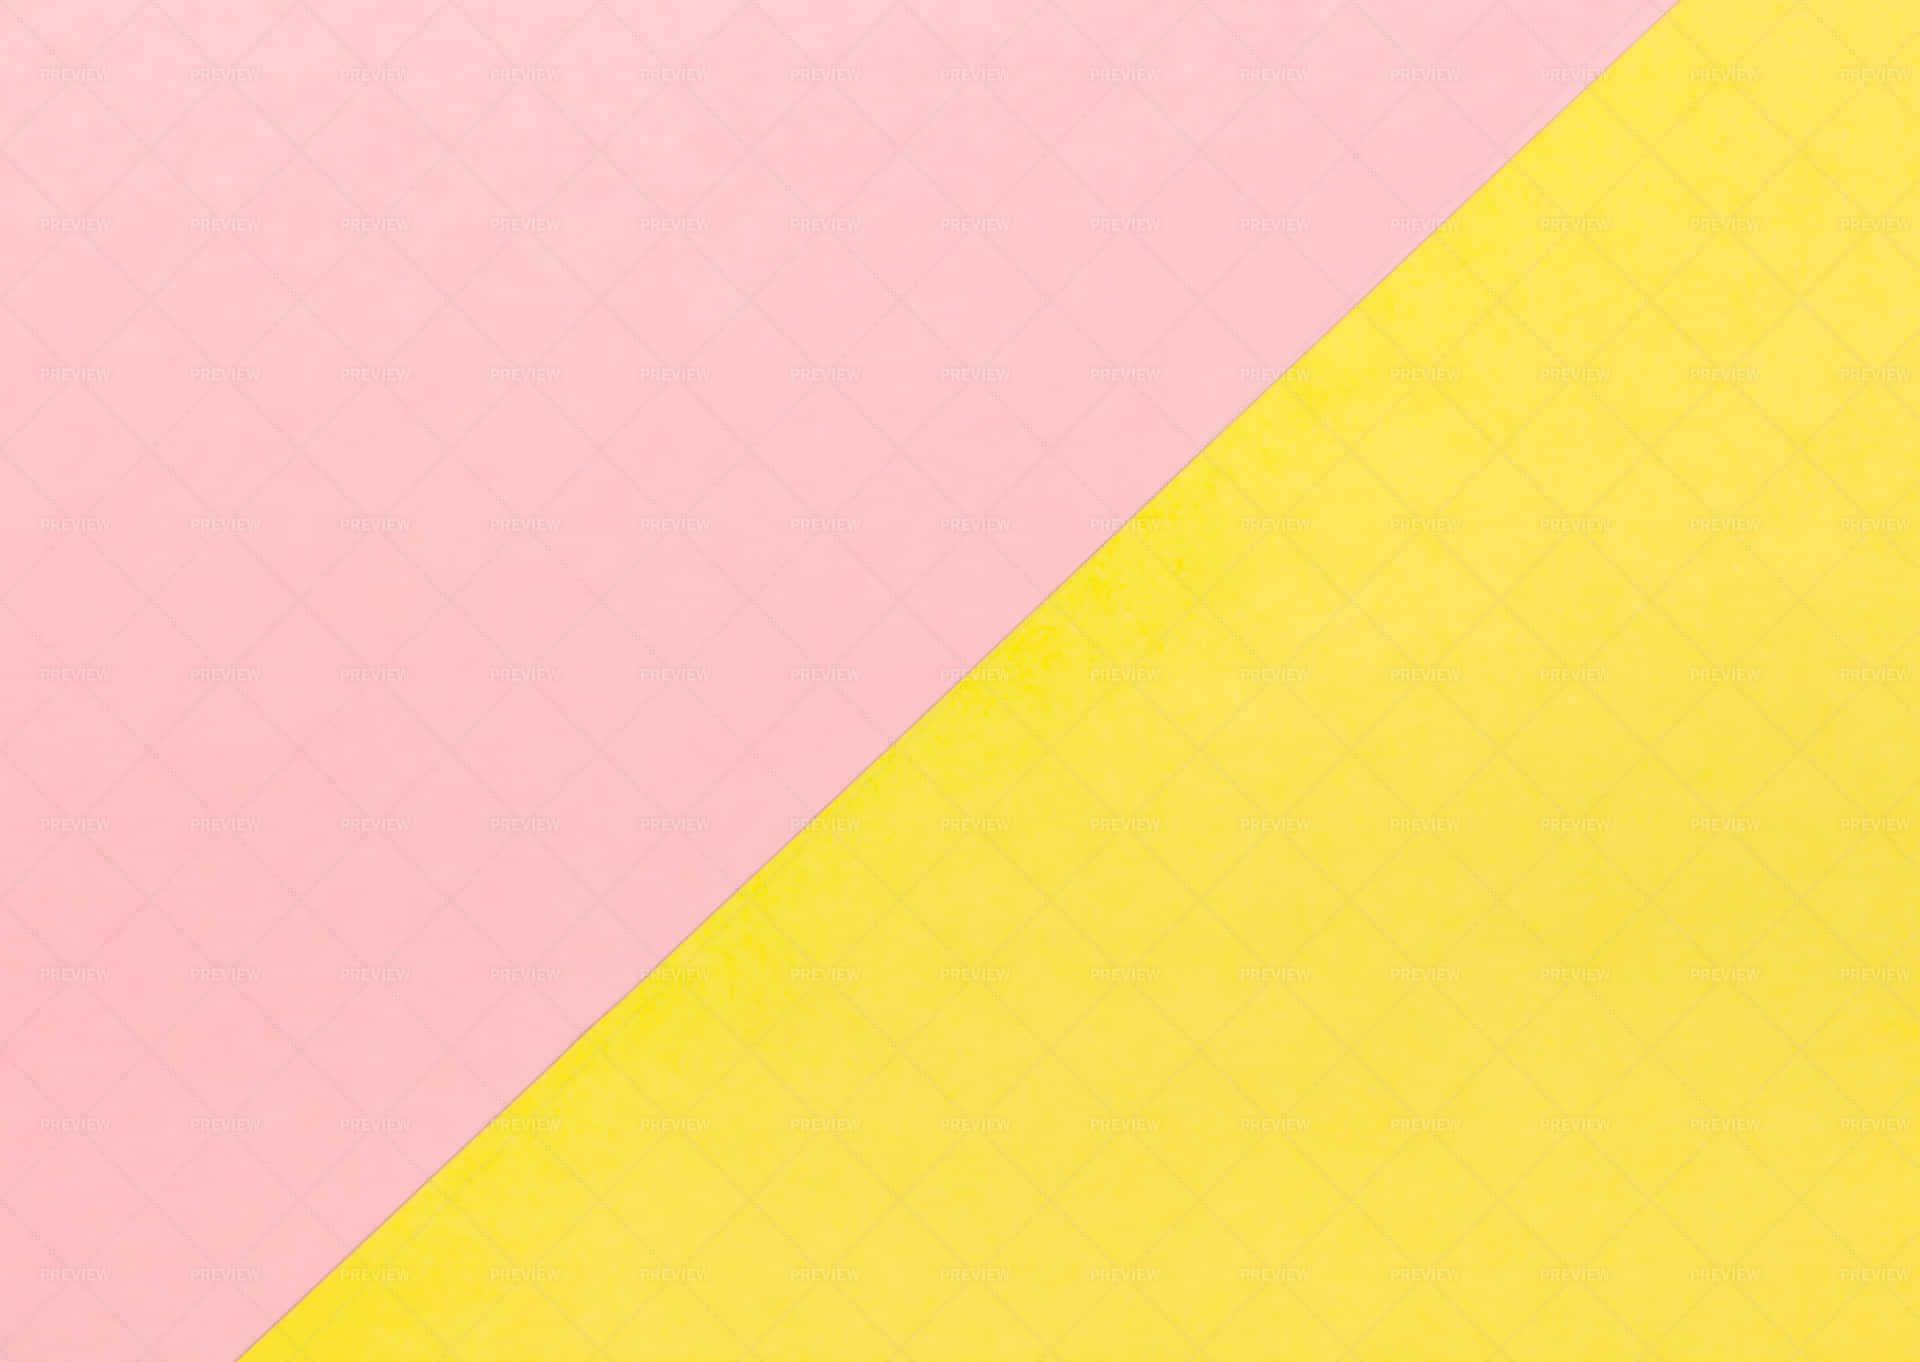 Enjoy vibrant colors with pastel pink and yellow Wallpaper